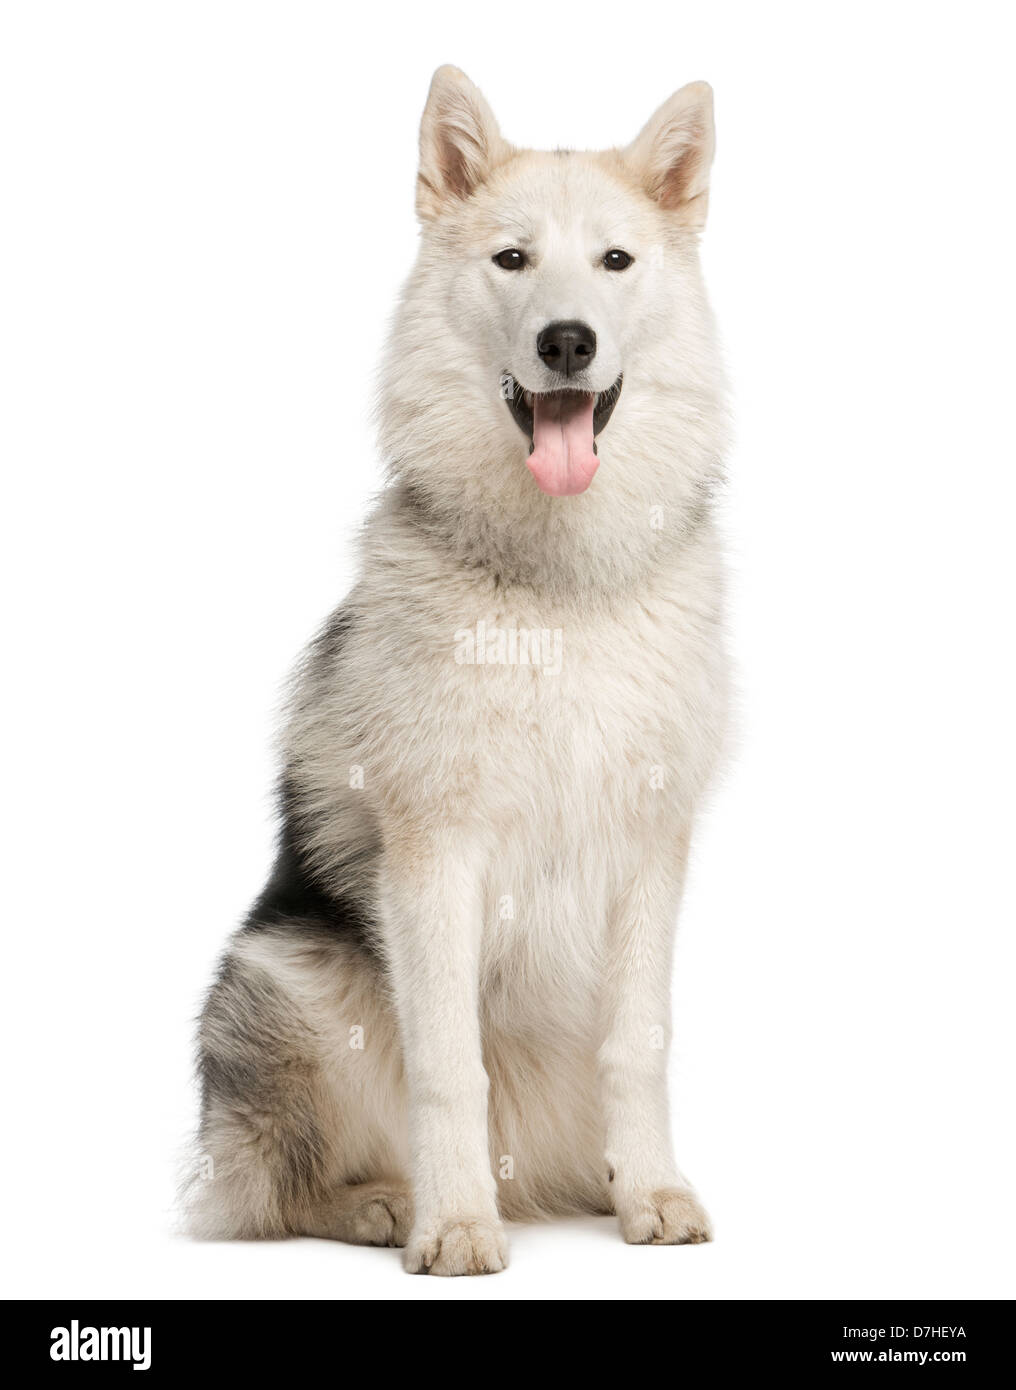 Alaskan Malamute, 7 months old, sitting against white background Stock Photo